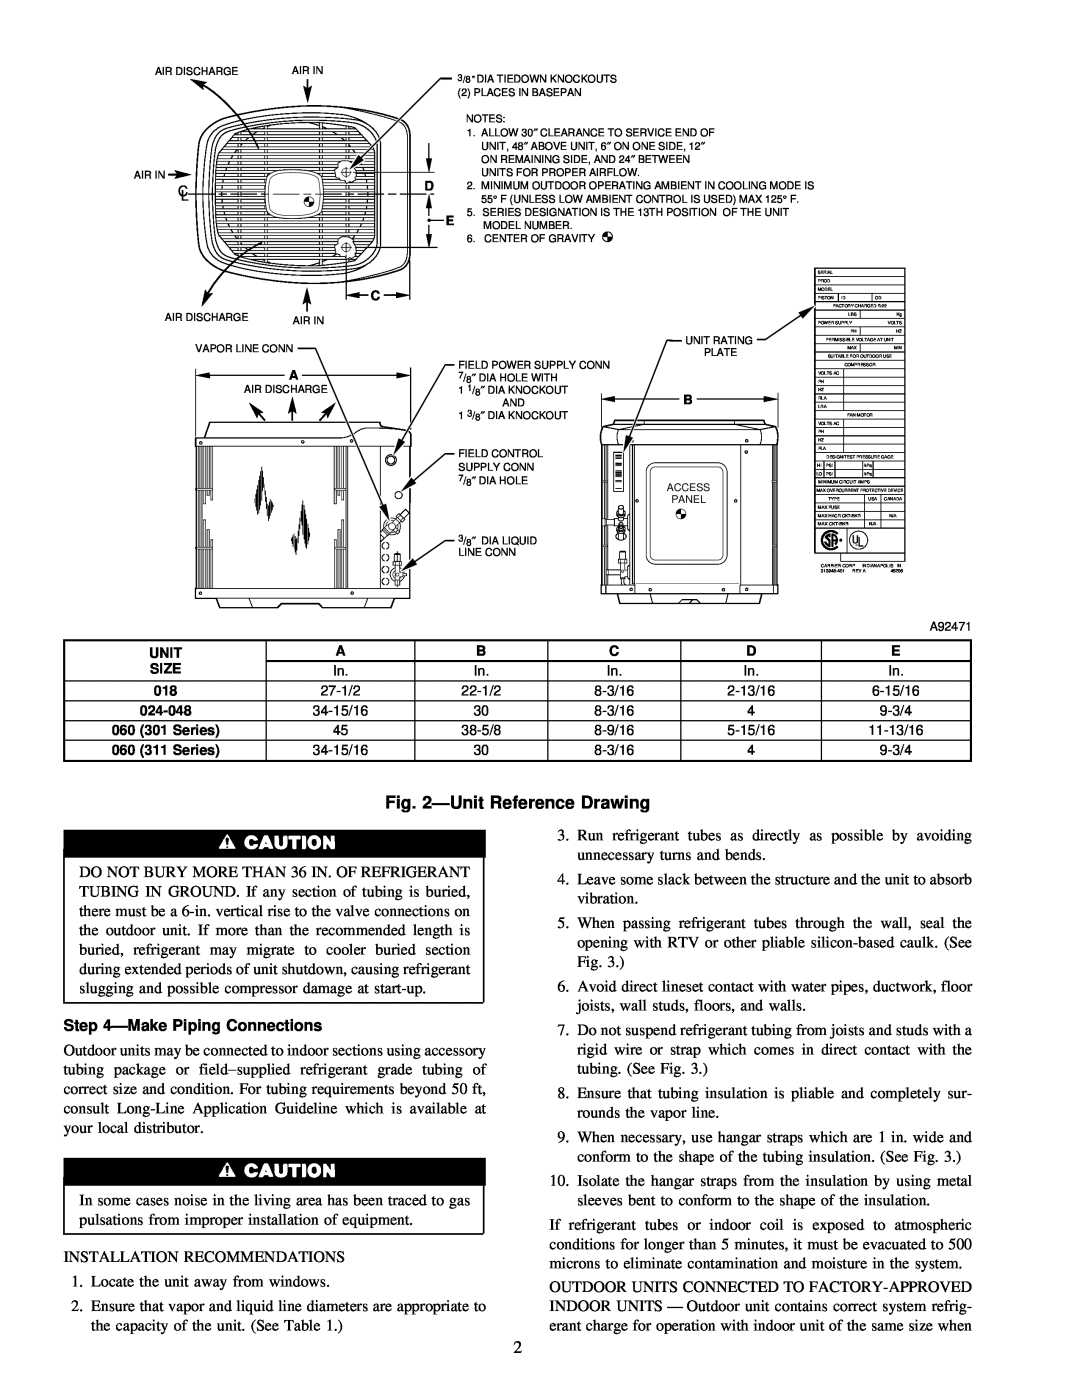 Carrier 38TRA instruction manual ÐUnit Reference Drawing, ÐMake Piping Connections 